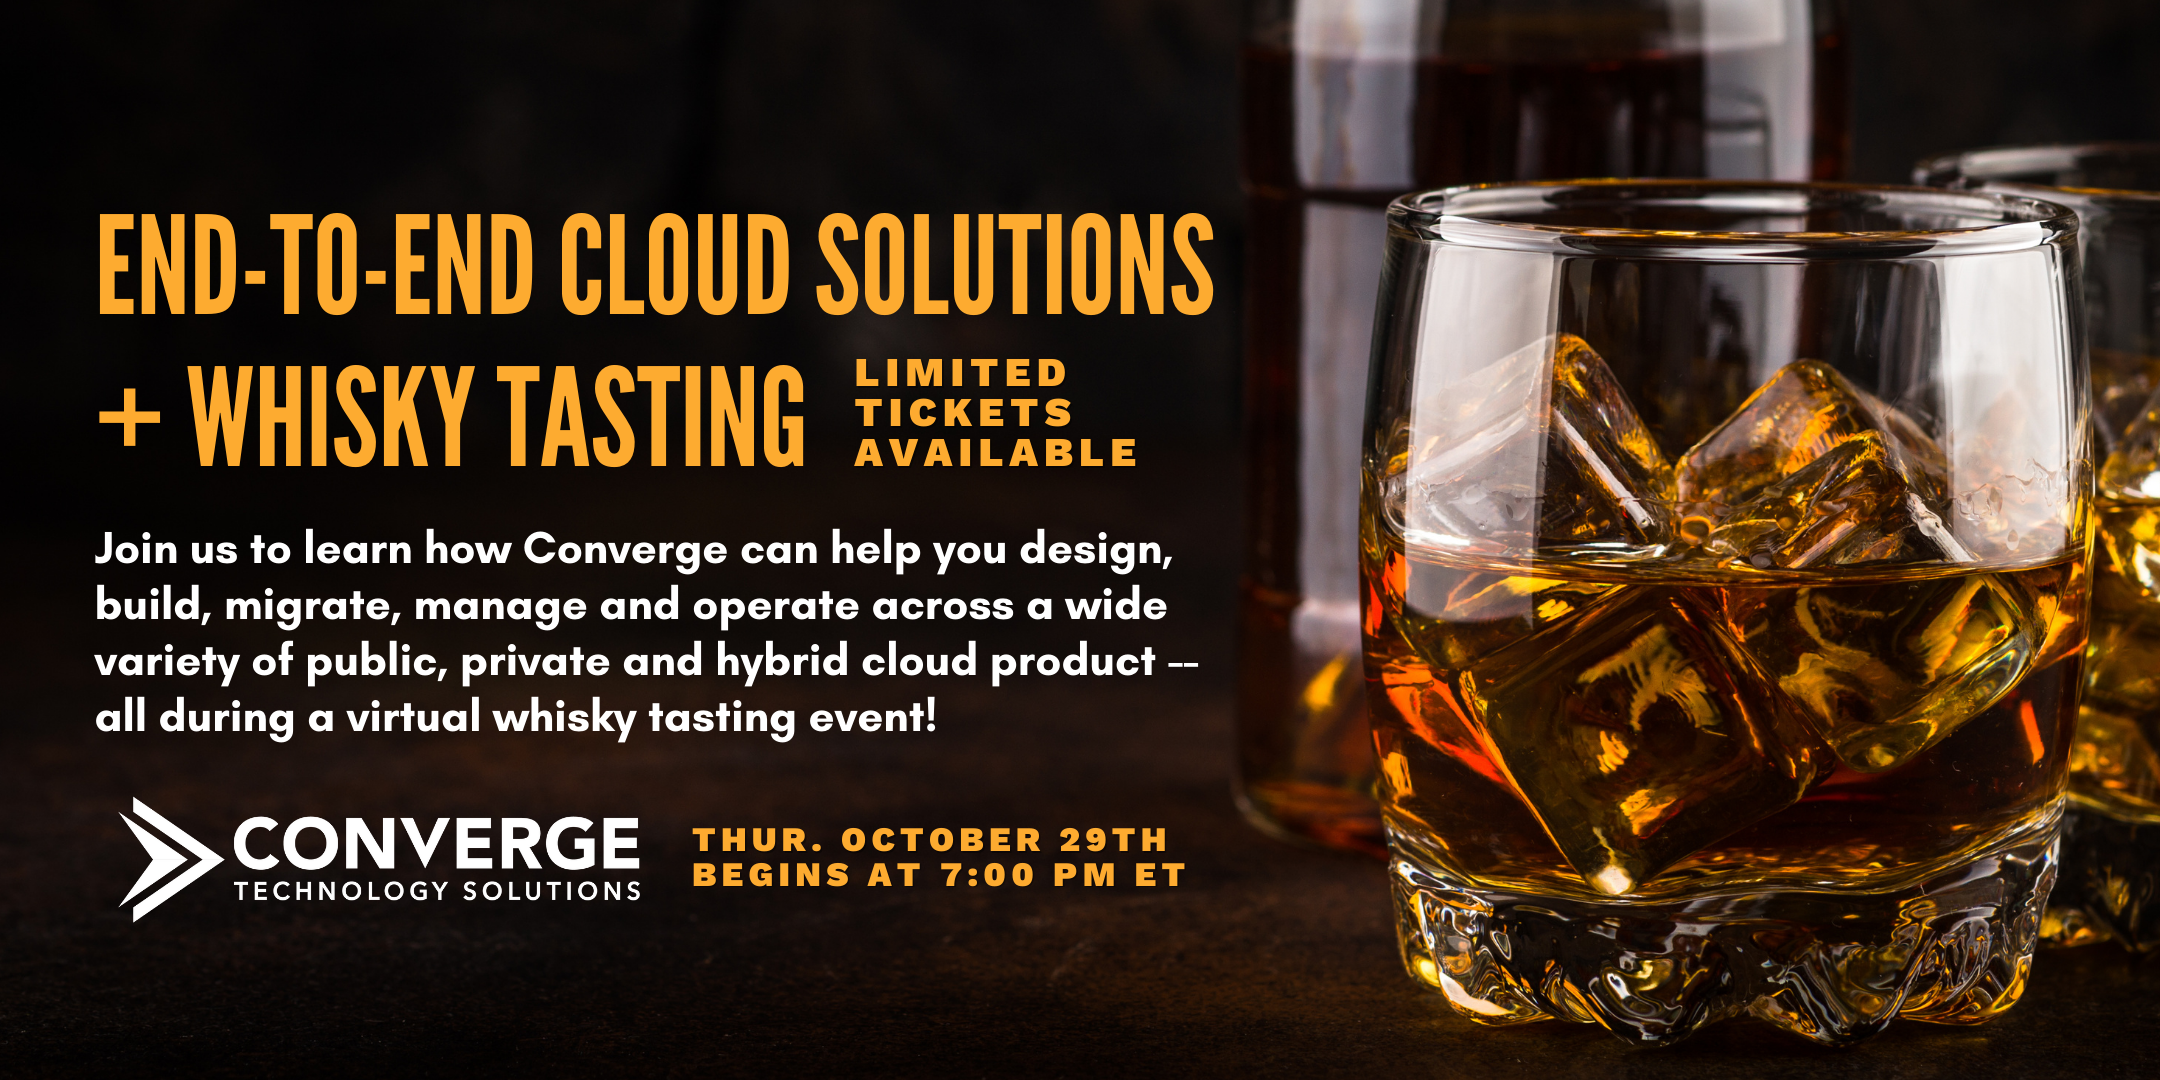 End-to-End Cloud Solutions and Whisky Tasting